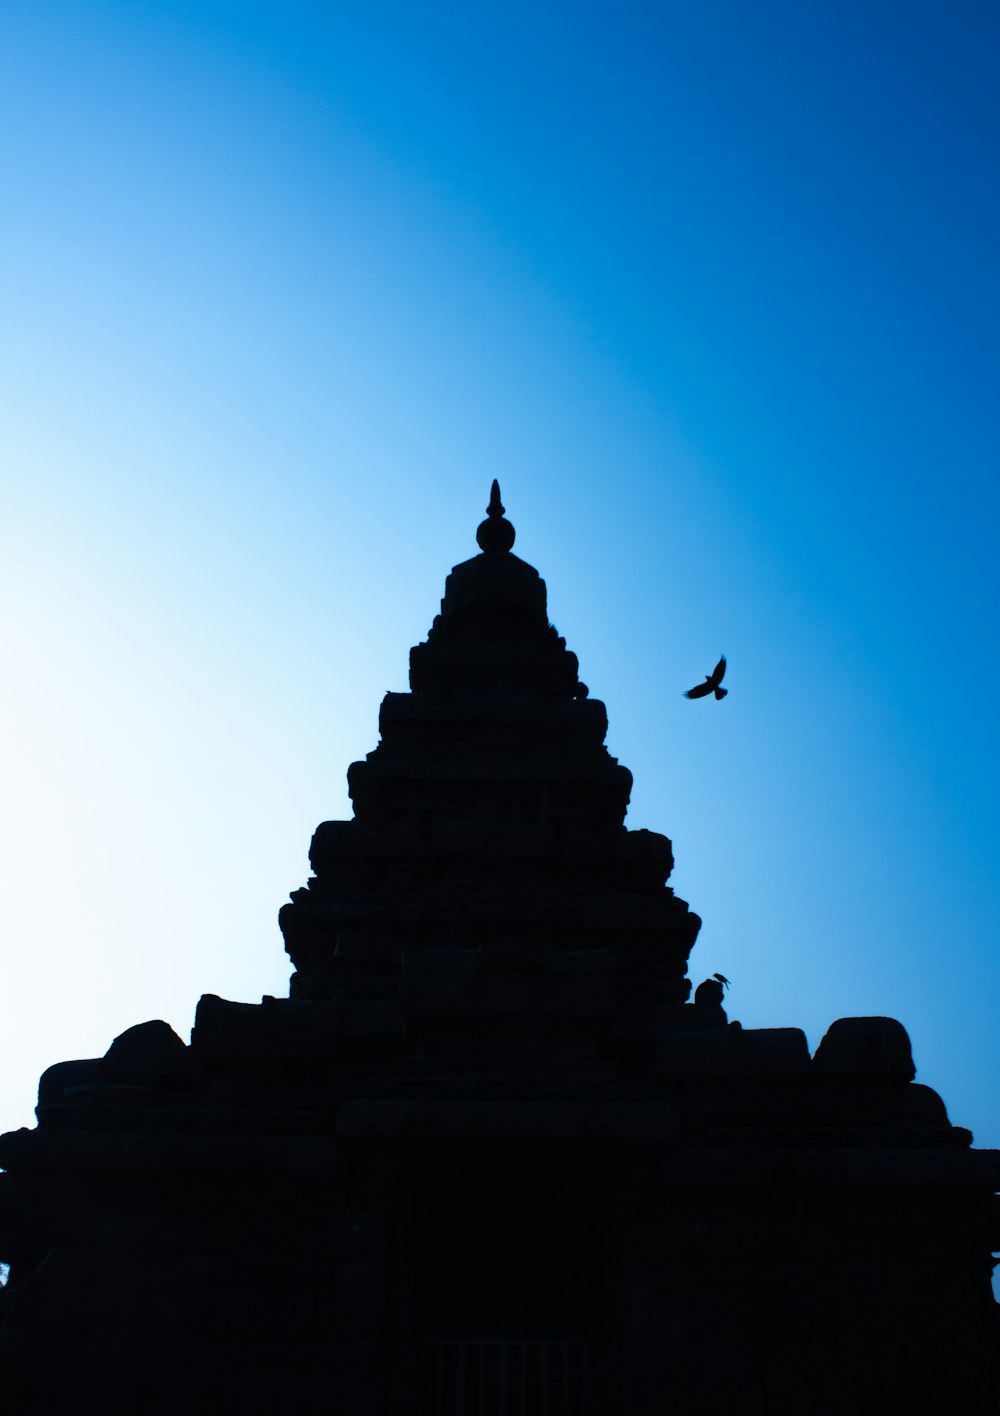 a silhouette of a building with a bird flying over it